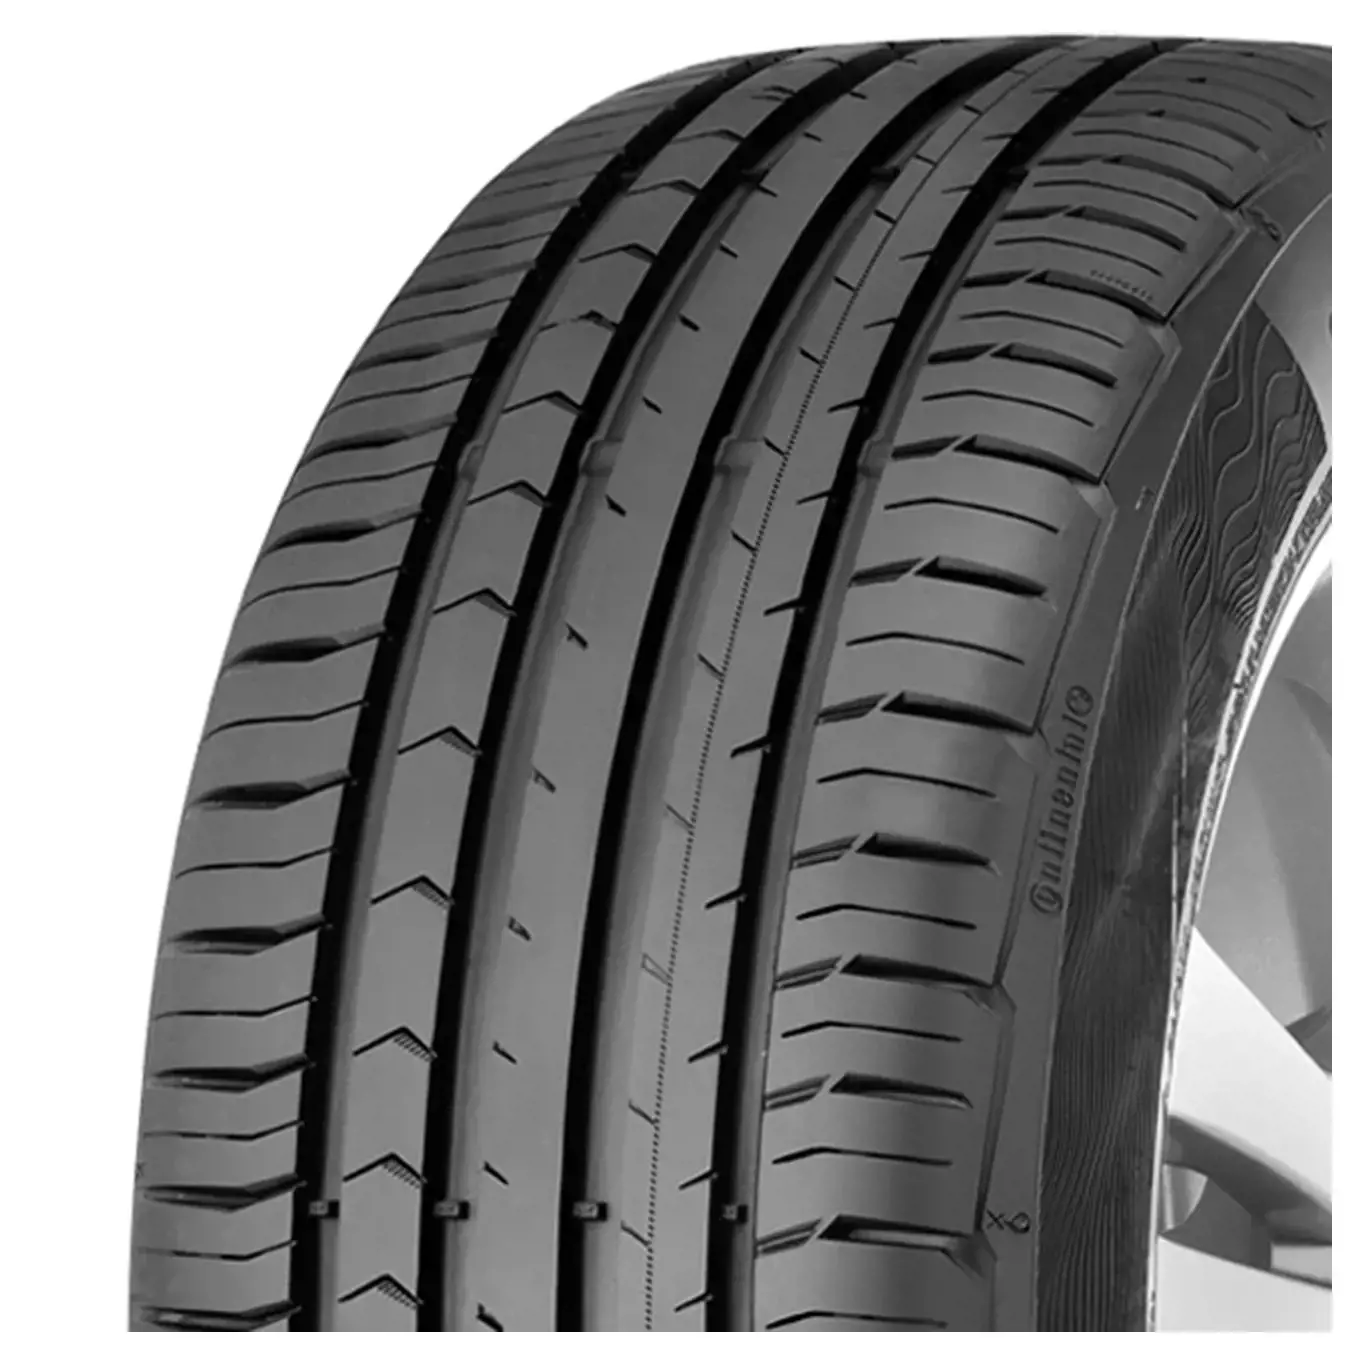 225/55 R17 97W PremiumContact 5 ContiSeal